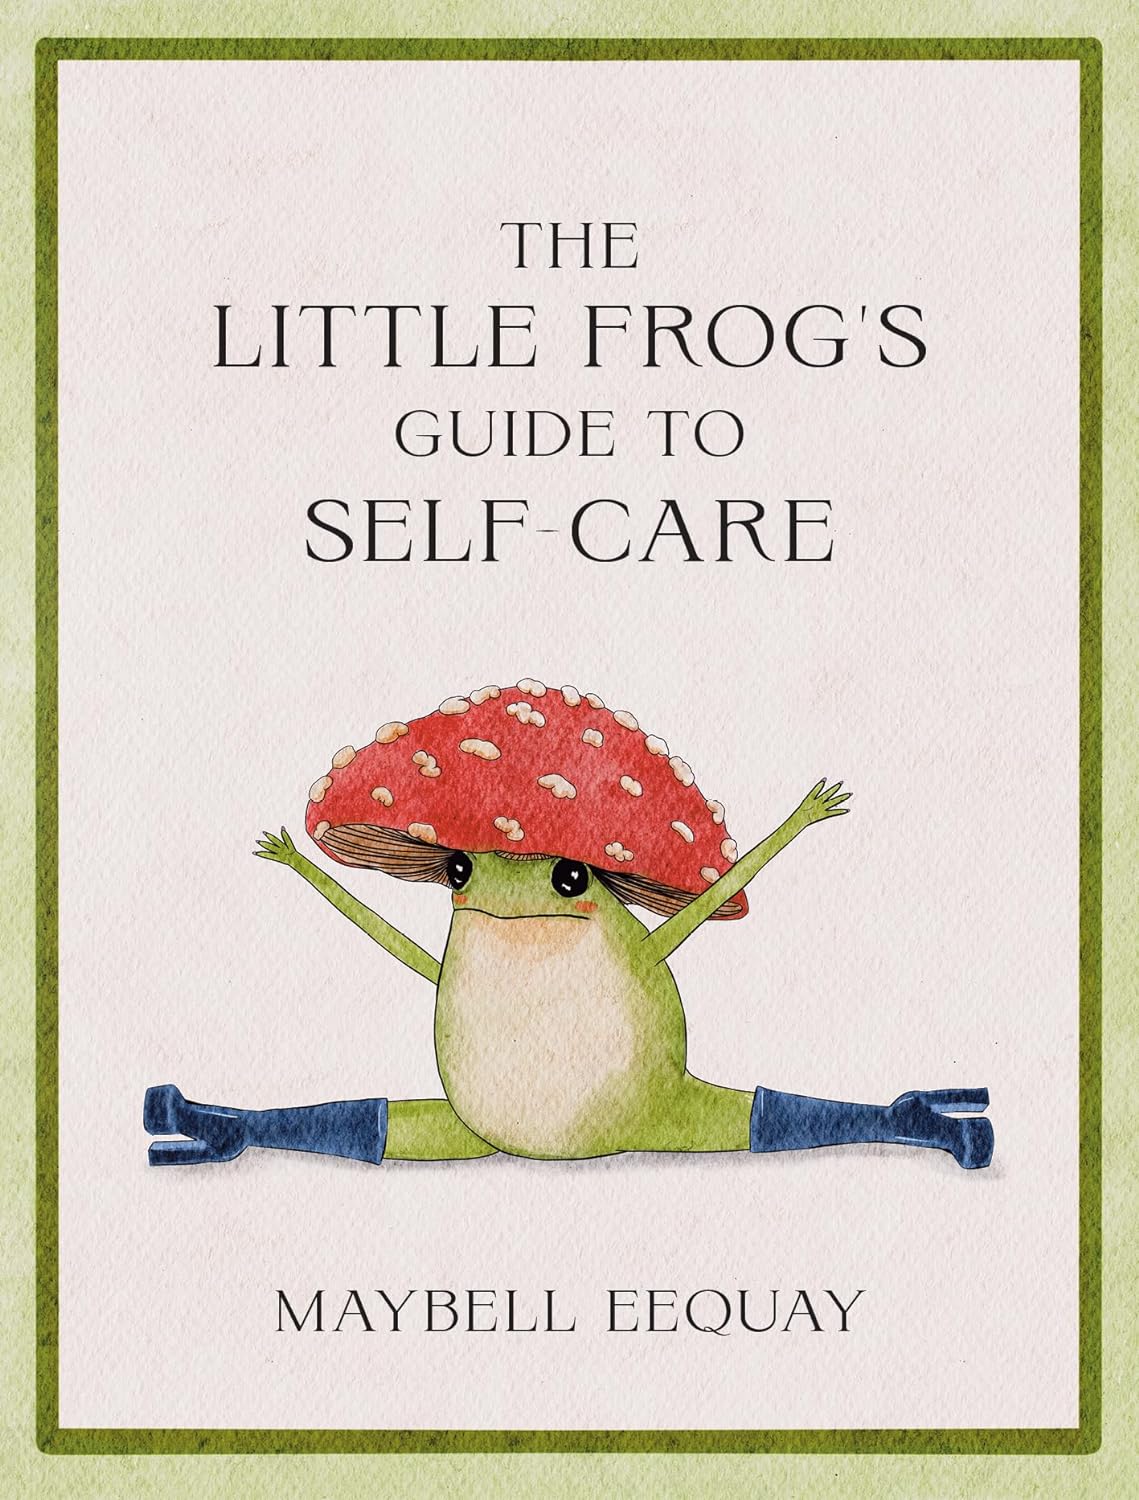 The Little Frogs Guide To Self-Care